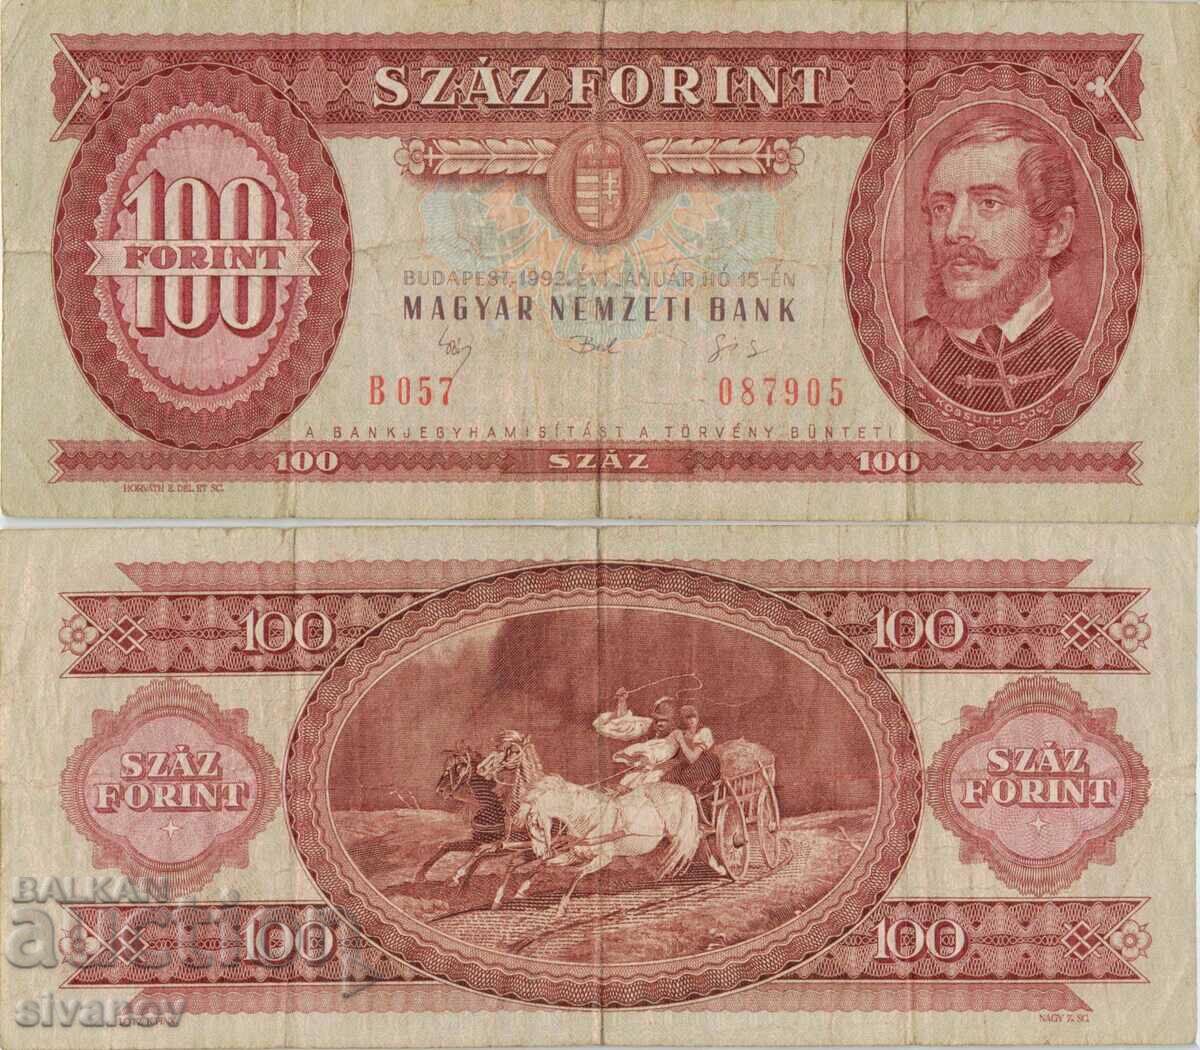 Hungary 100 forint 1992 banknote #5209